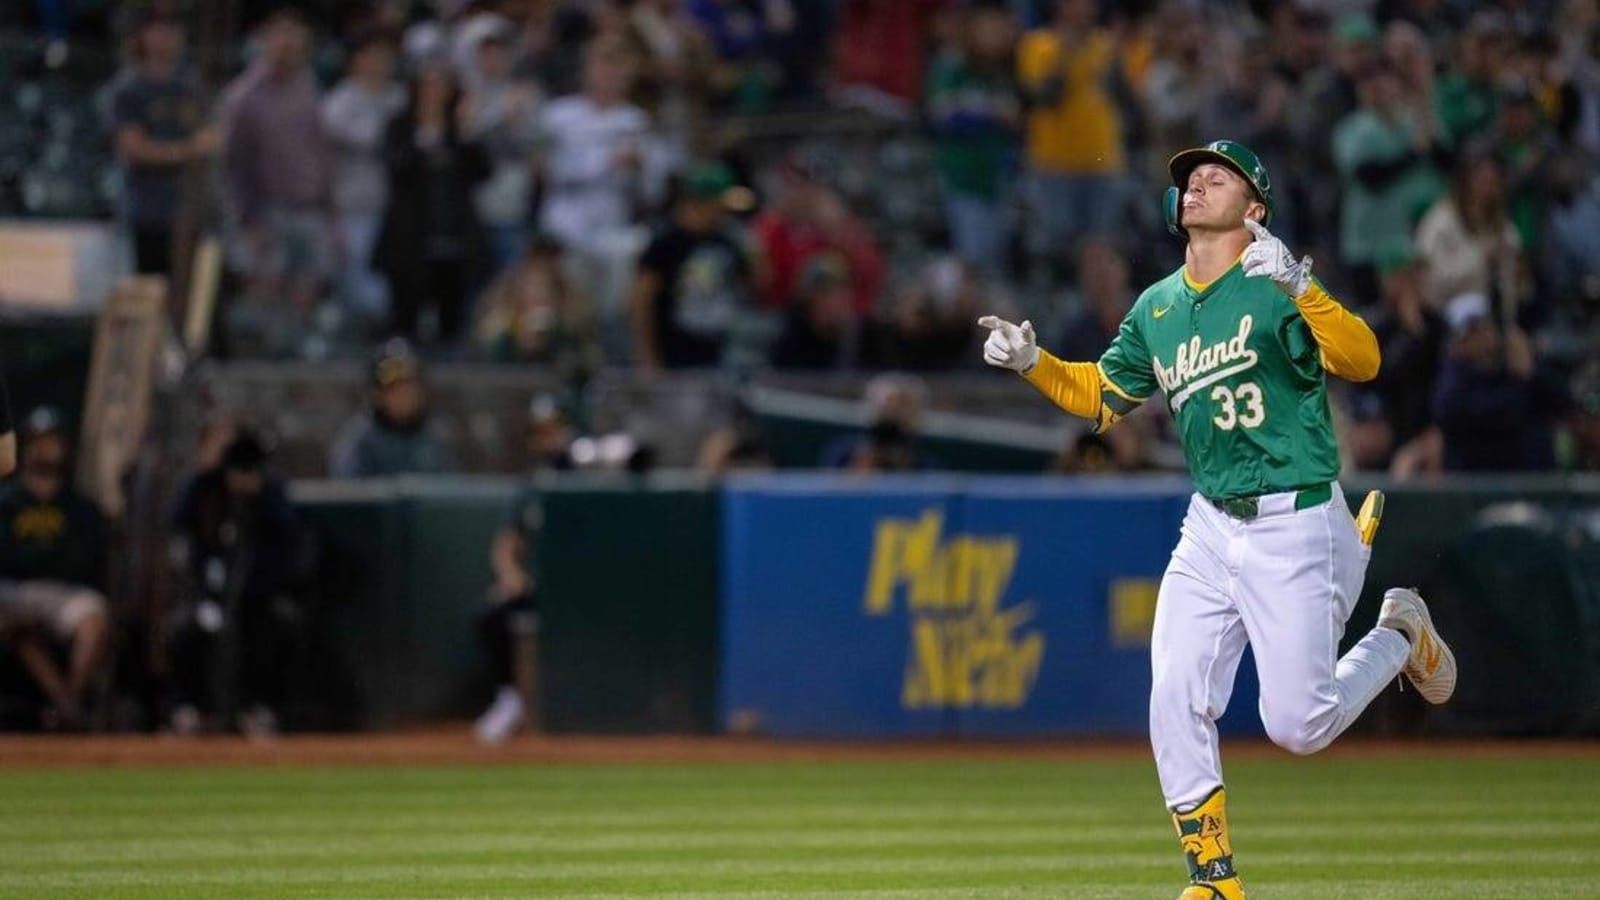 JJ Bleday&#39;s two home runs carry A&#39;s past Pirates